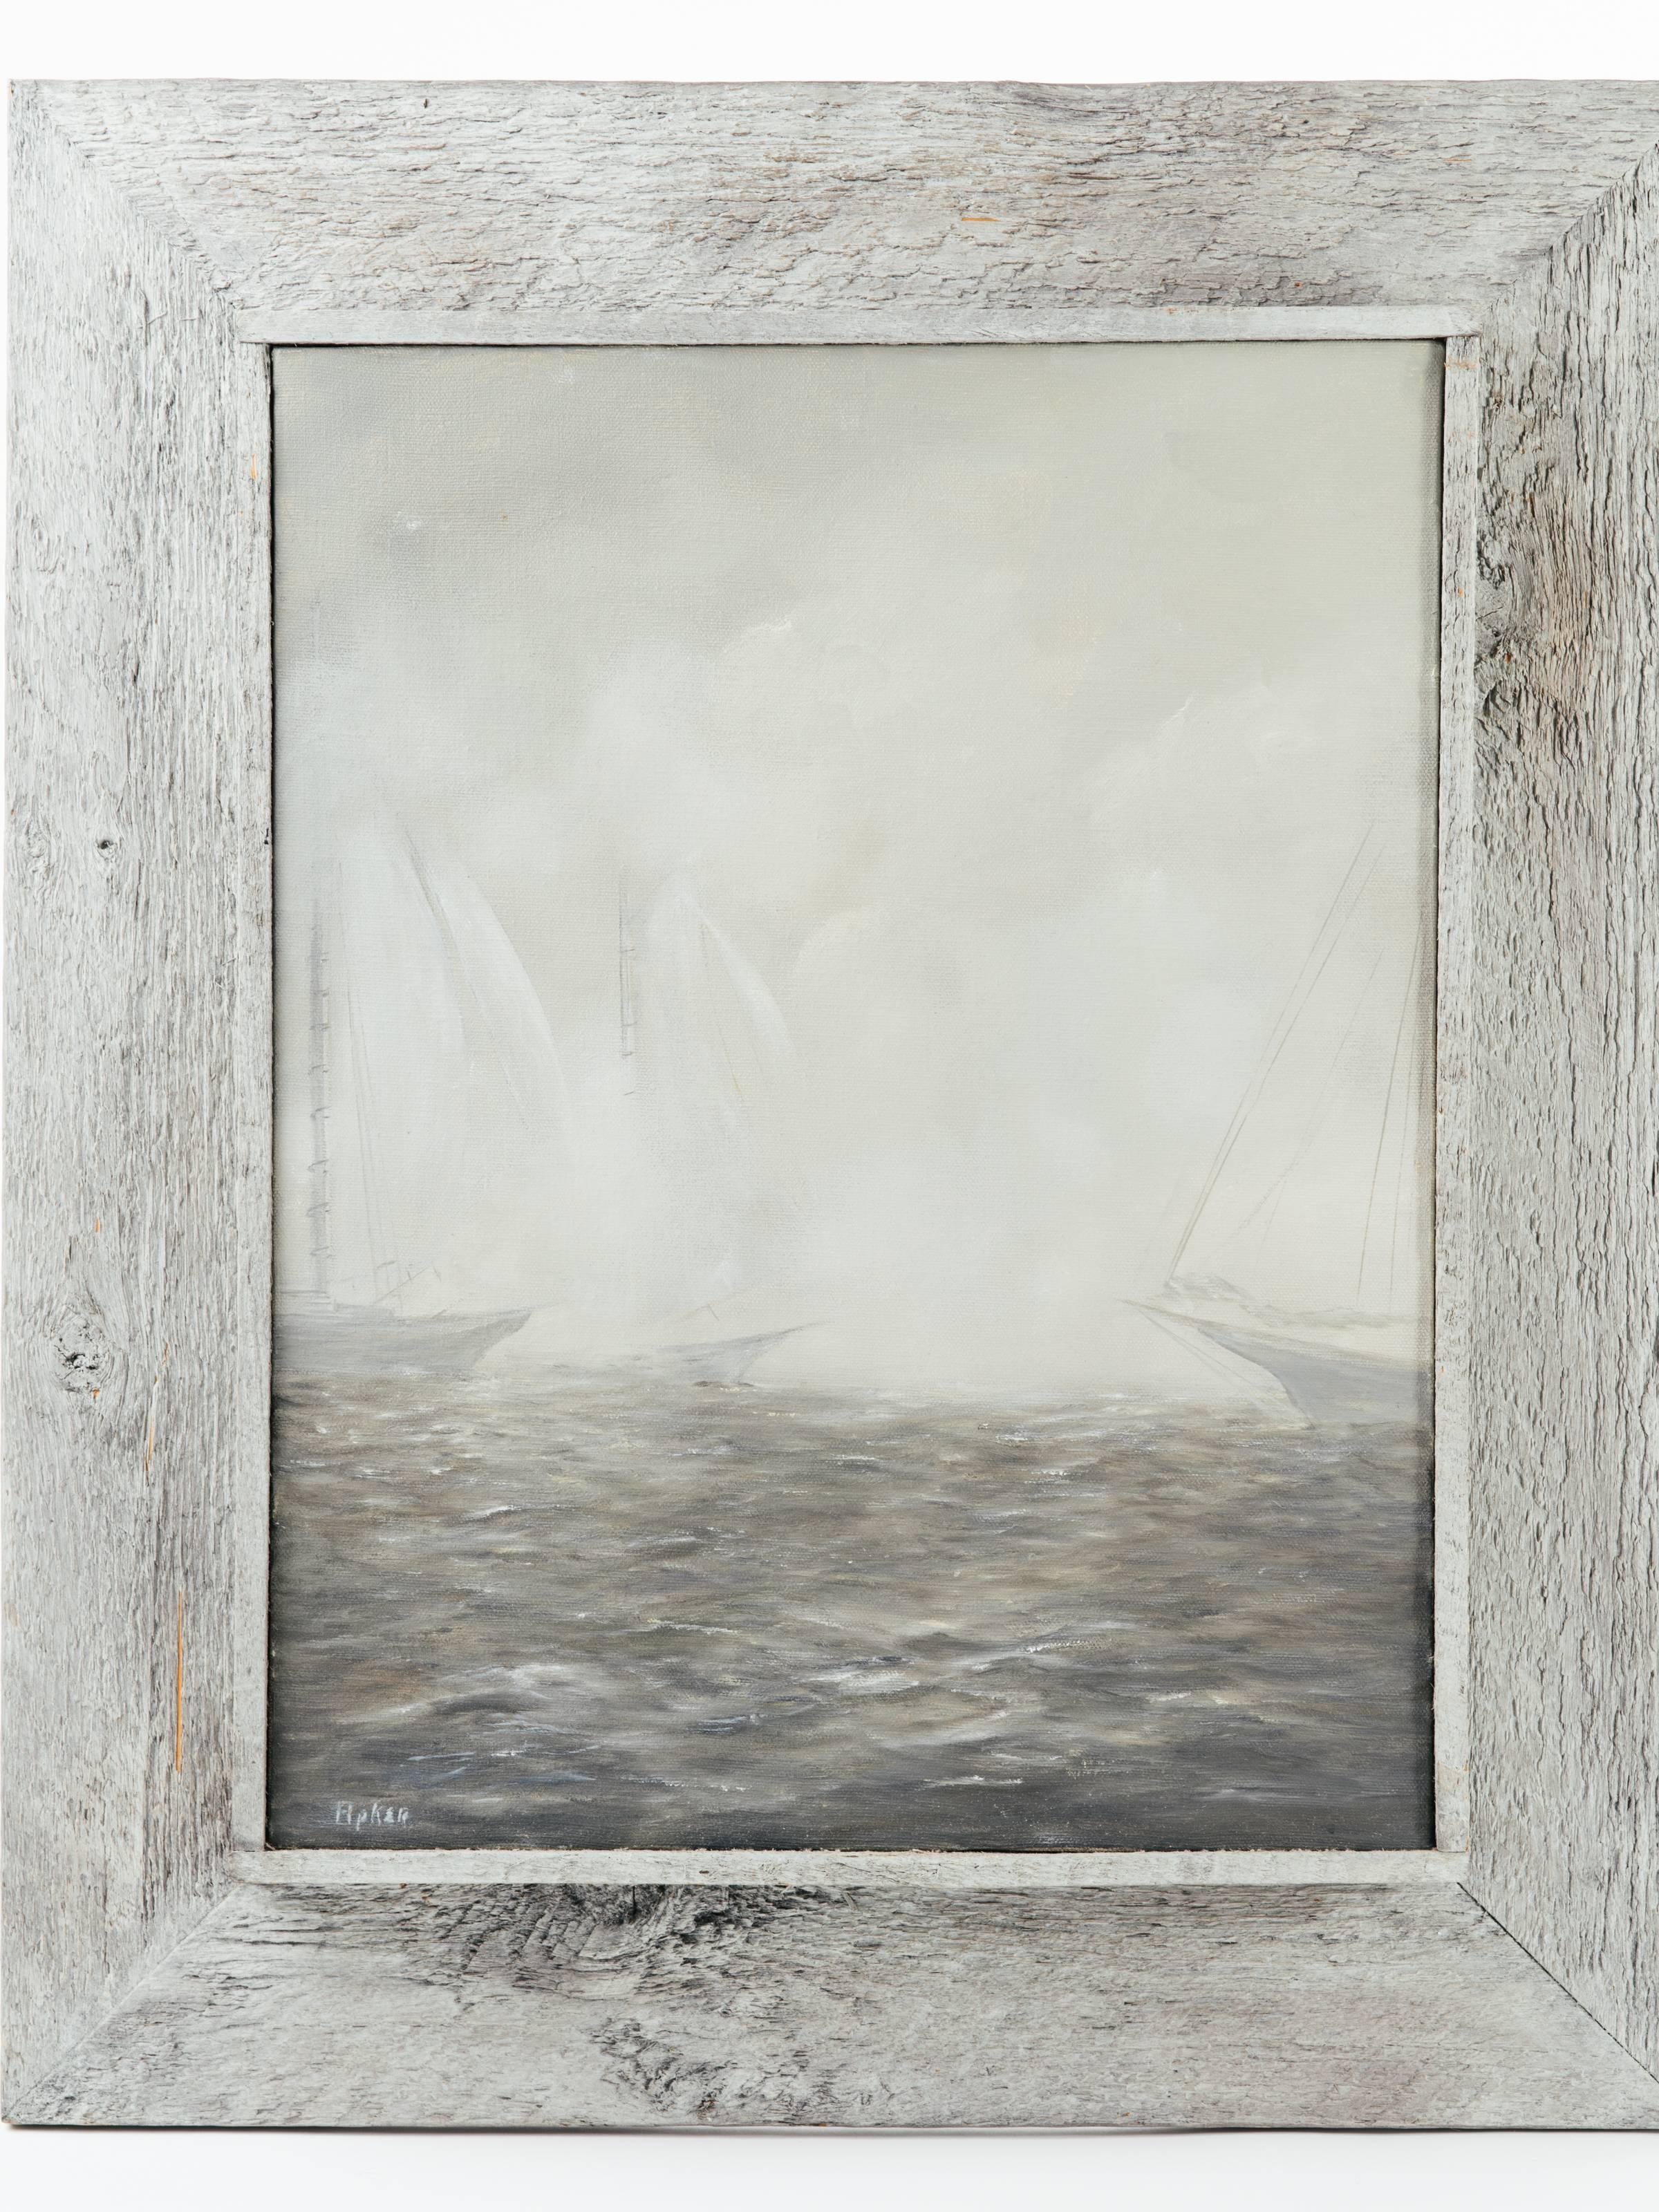 Beautiful Mid-Century Modern impressionism painting depicting a series of sailboats in heavy fog. Comprised of monochromatic colors in hues of grey, taupe, and white. In original rustic pine wood shadowbox frame in a driftwood grey.